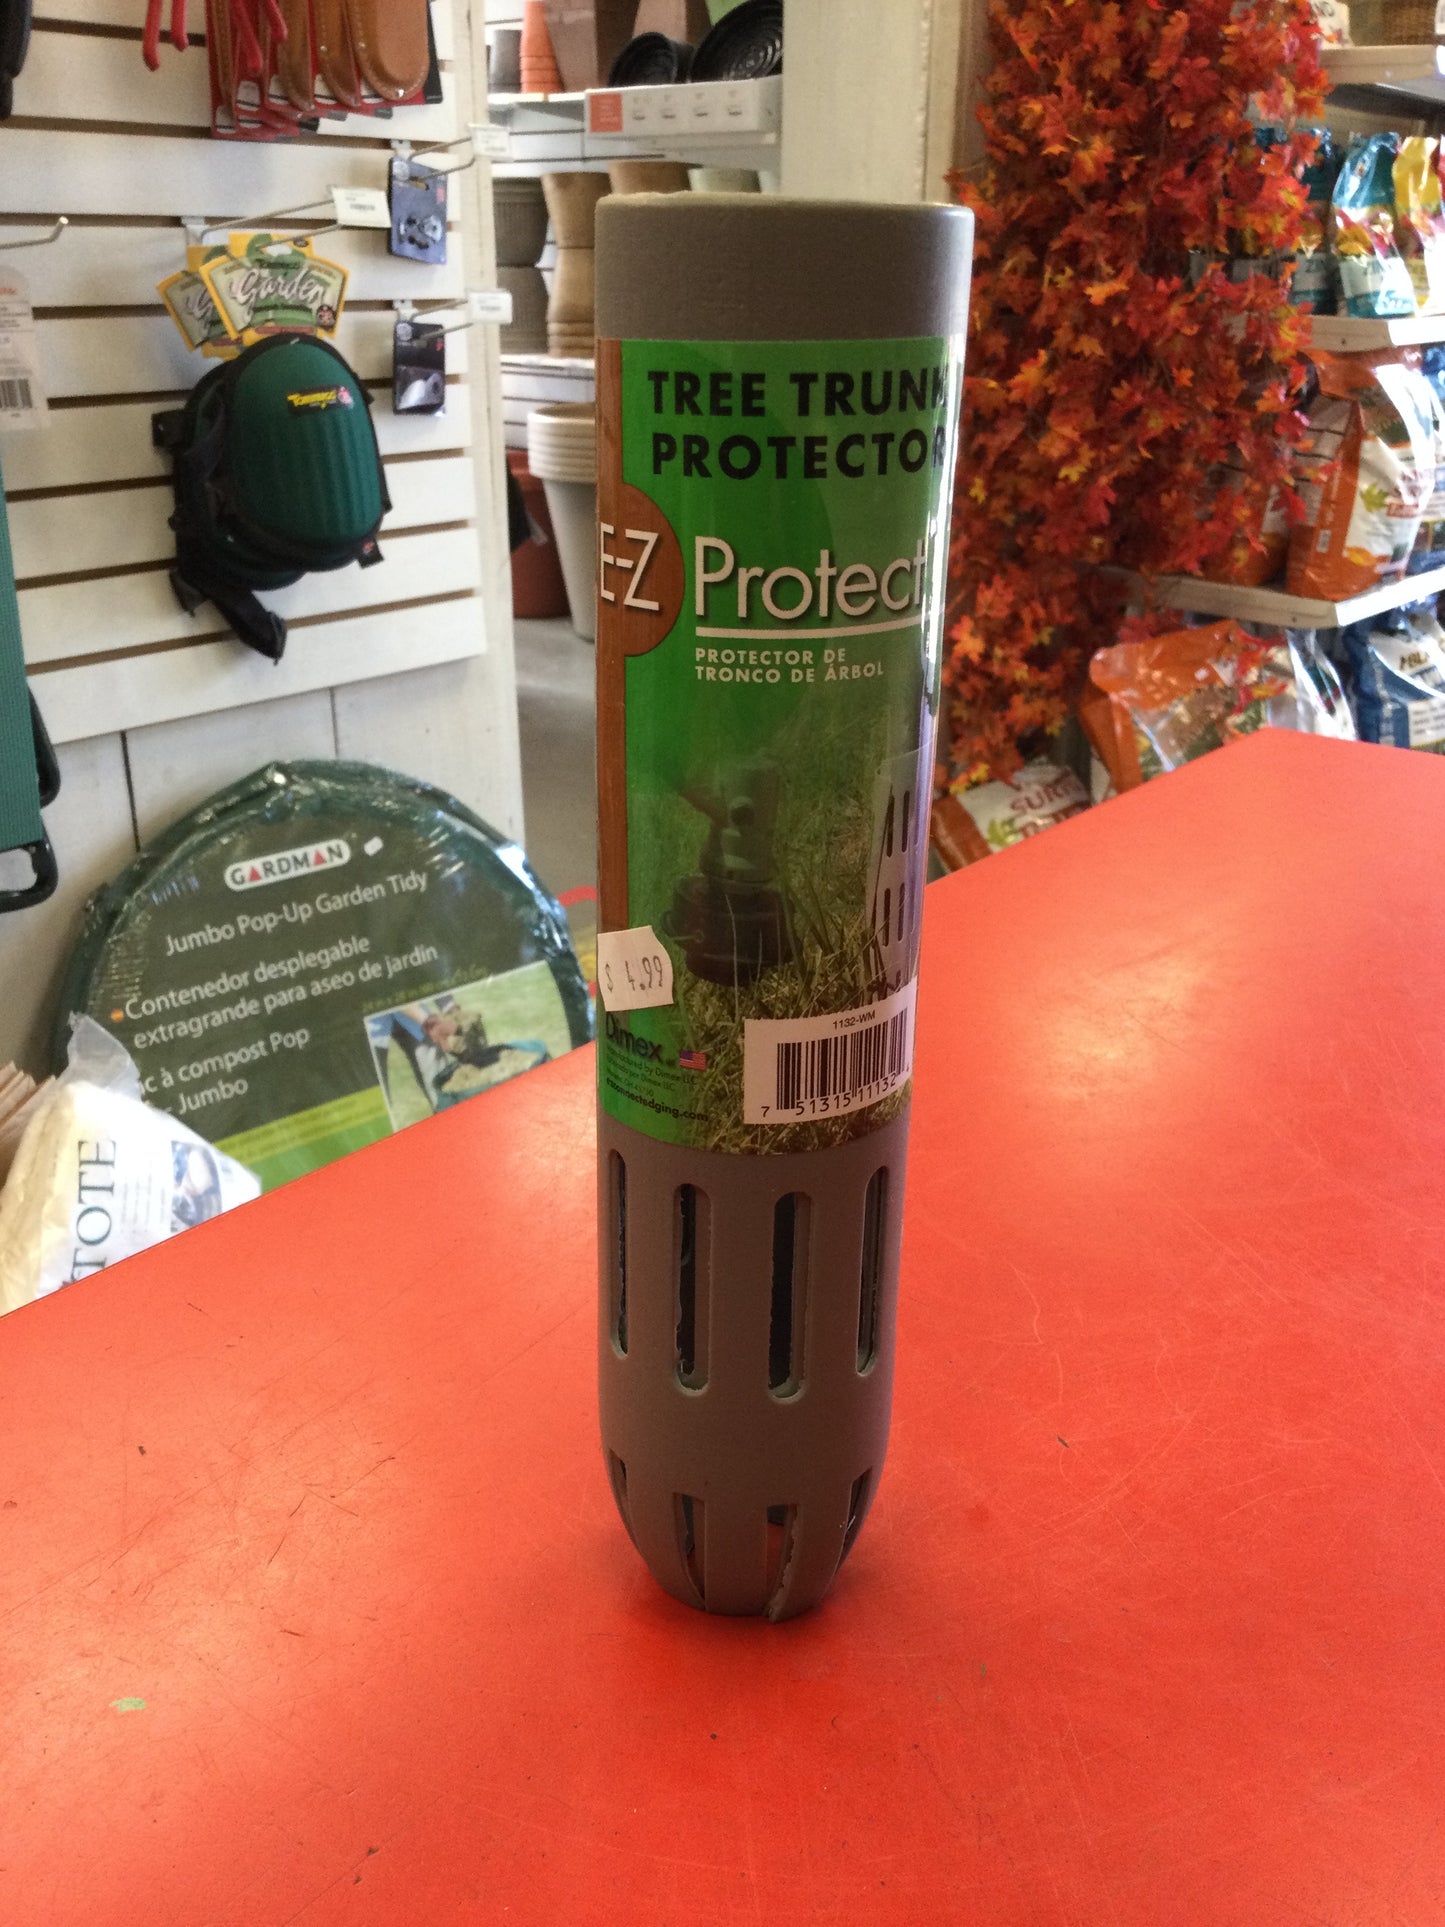 EZ protect tree trunk protector